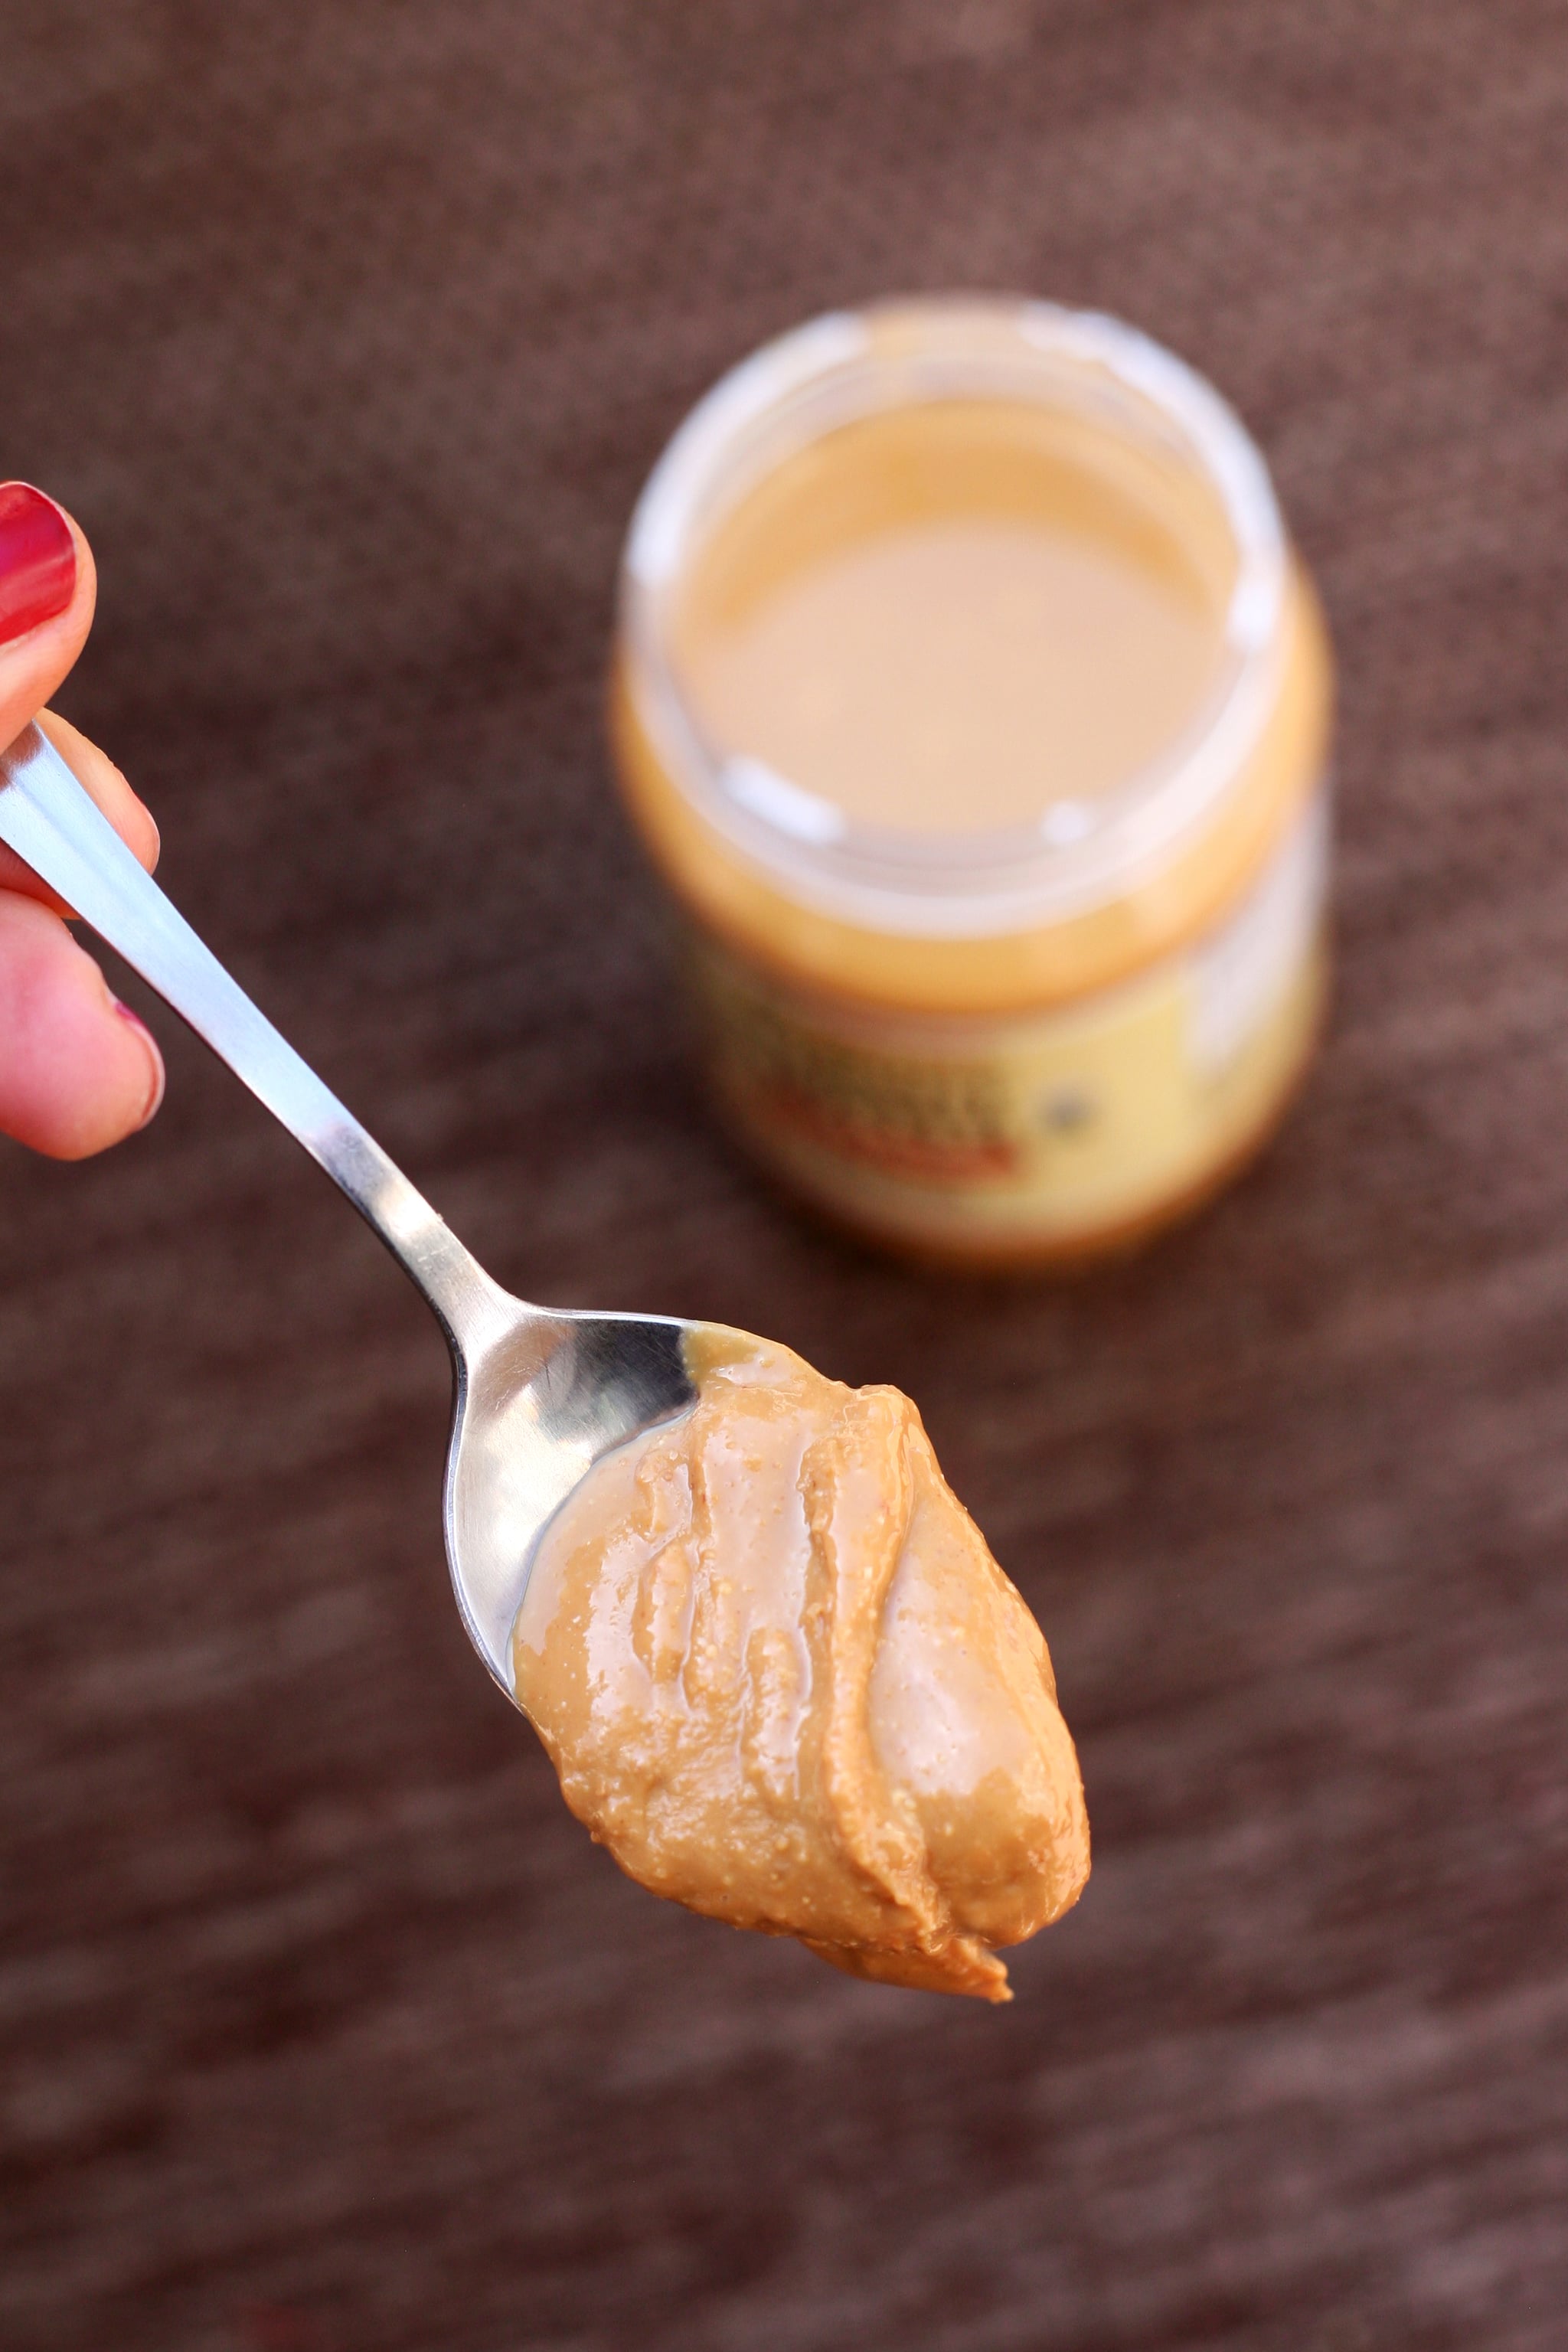 Is Peanut Butter Good For Weight Loss? | POPSUGAR Fitness ...